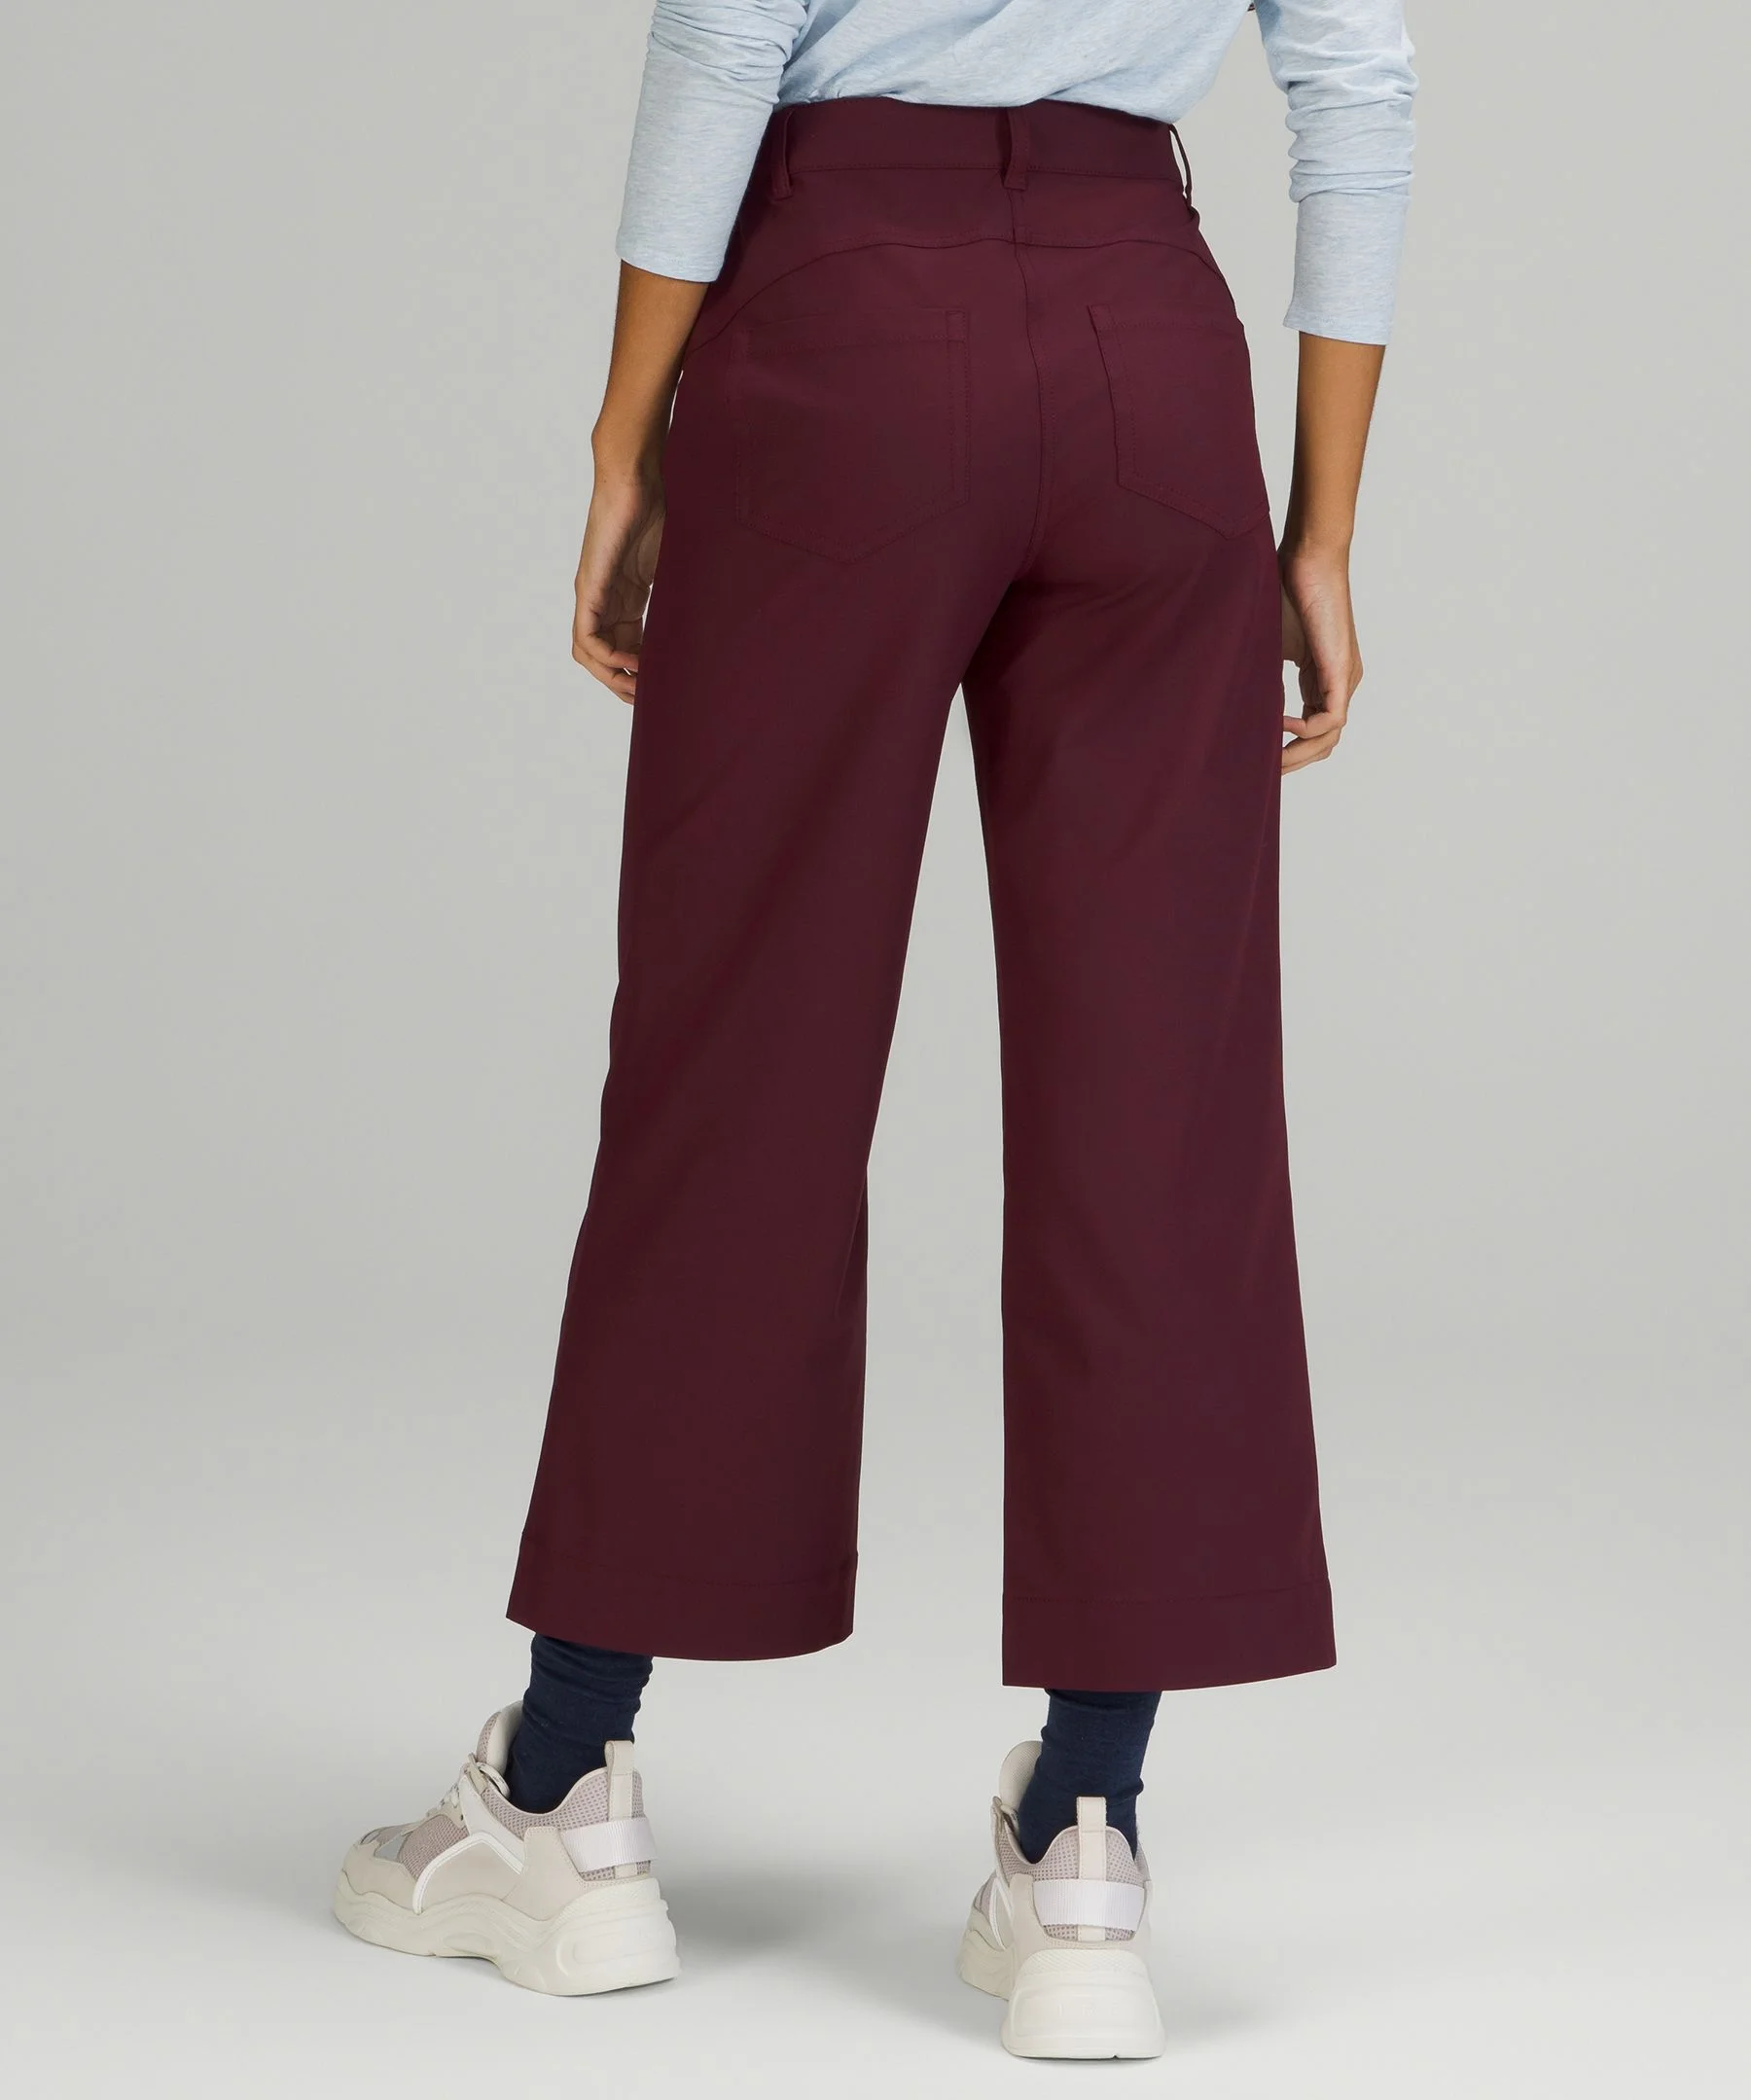 City sleek 5 pocket pant 7/8 on a TALL gal. Honestly the comfort and fit of  these pants is worth them being too short. : r/lululemon